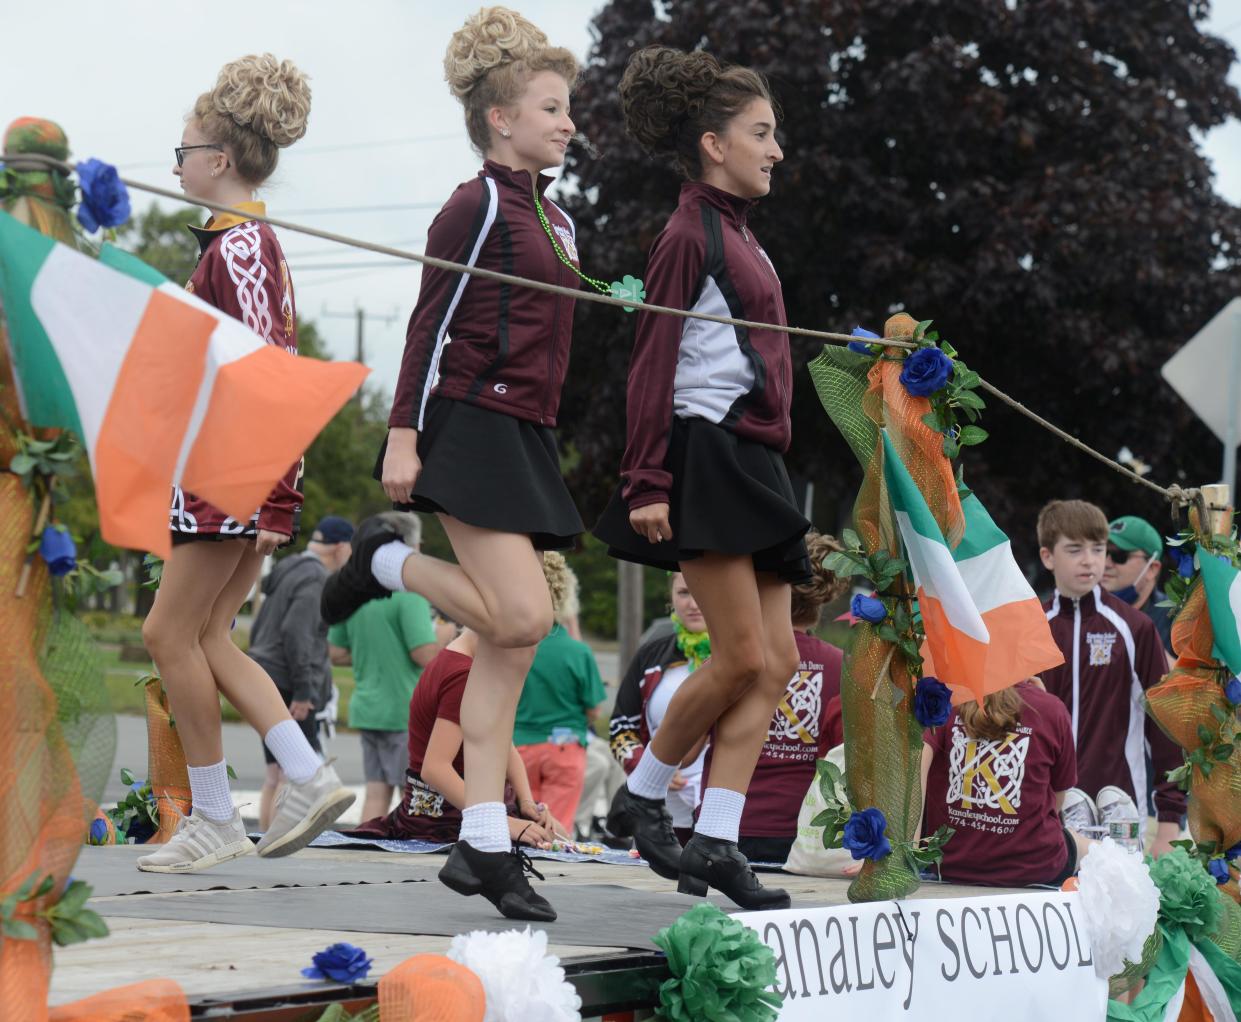 Dancers with the Kanaley School of Irish Dance will again entertain the crowd at the annual Cape Cod St. Patrick's Parade.